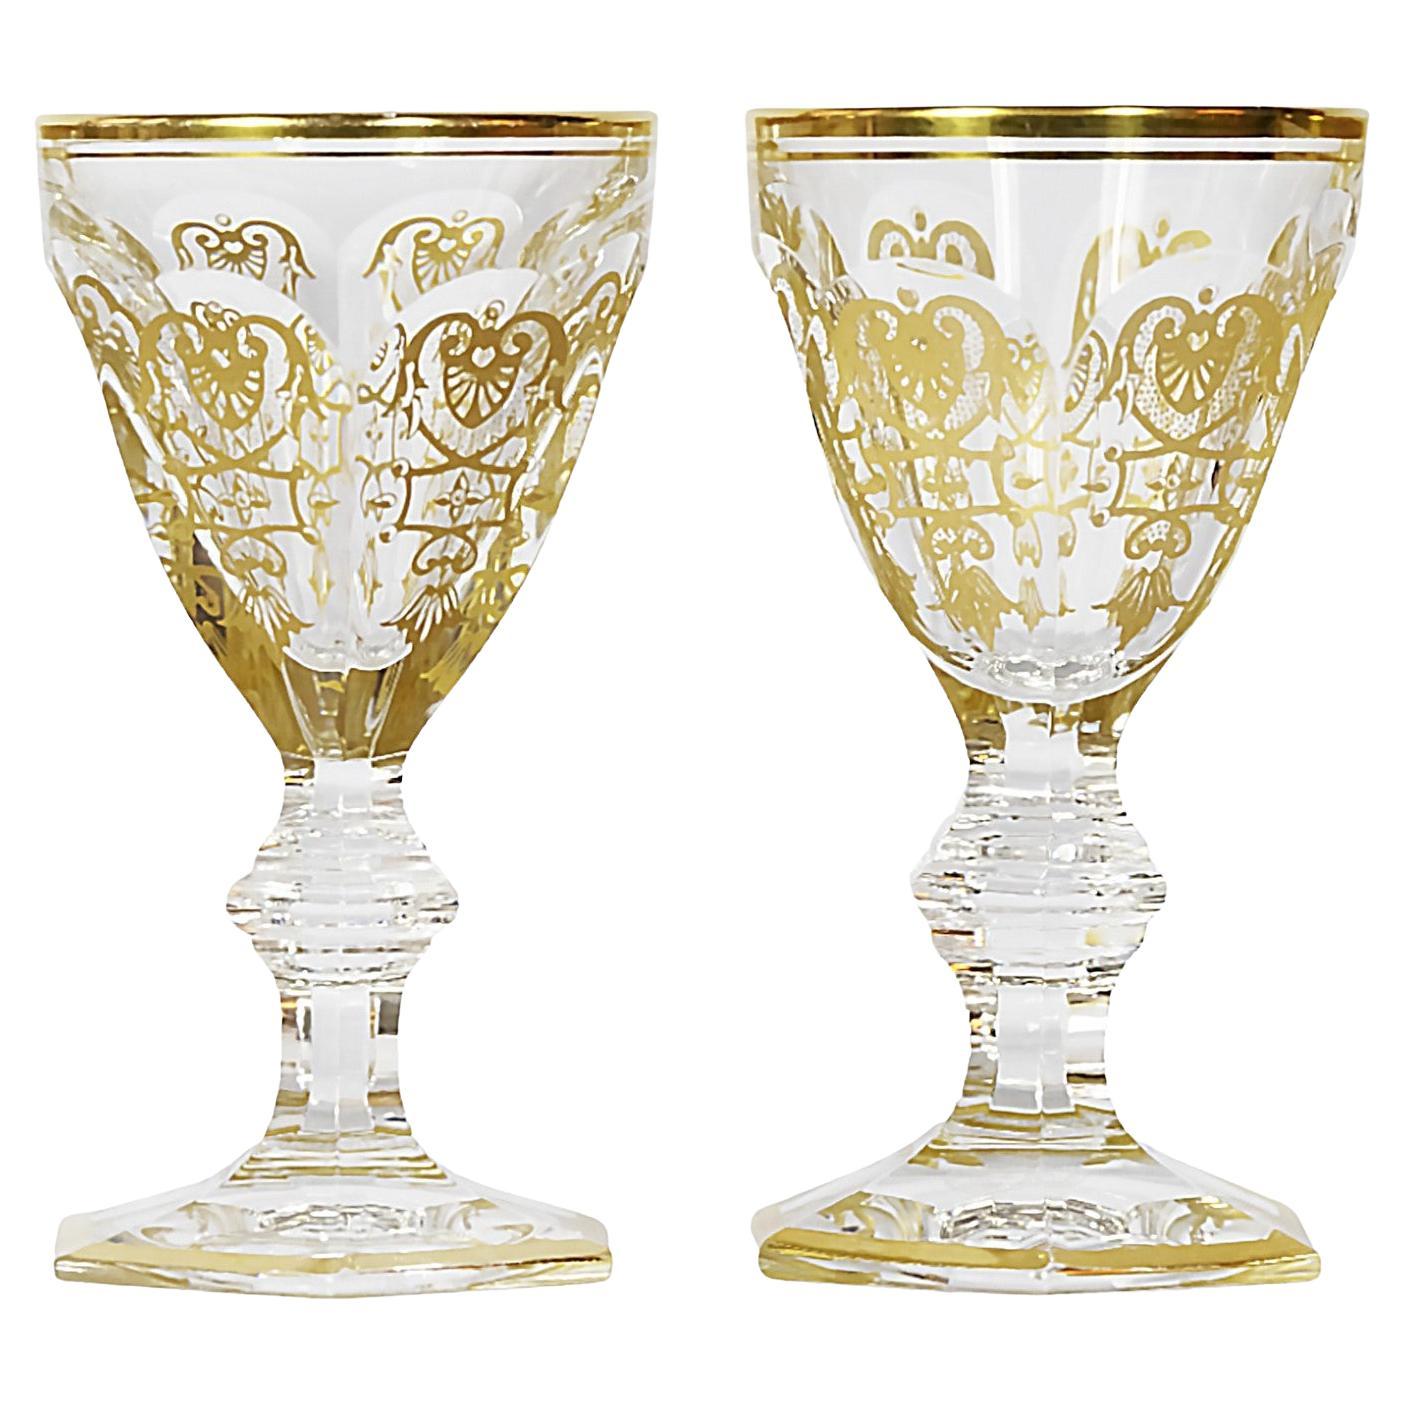 How can I spot real Baccarat glass?